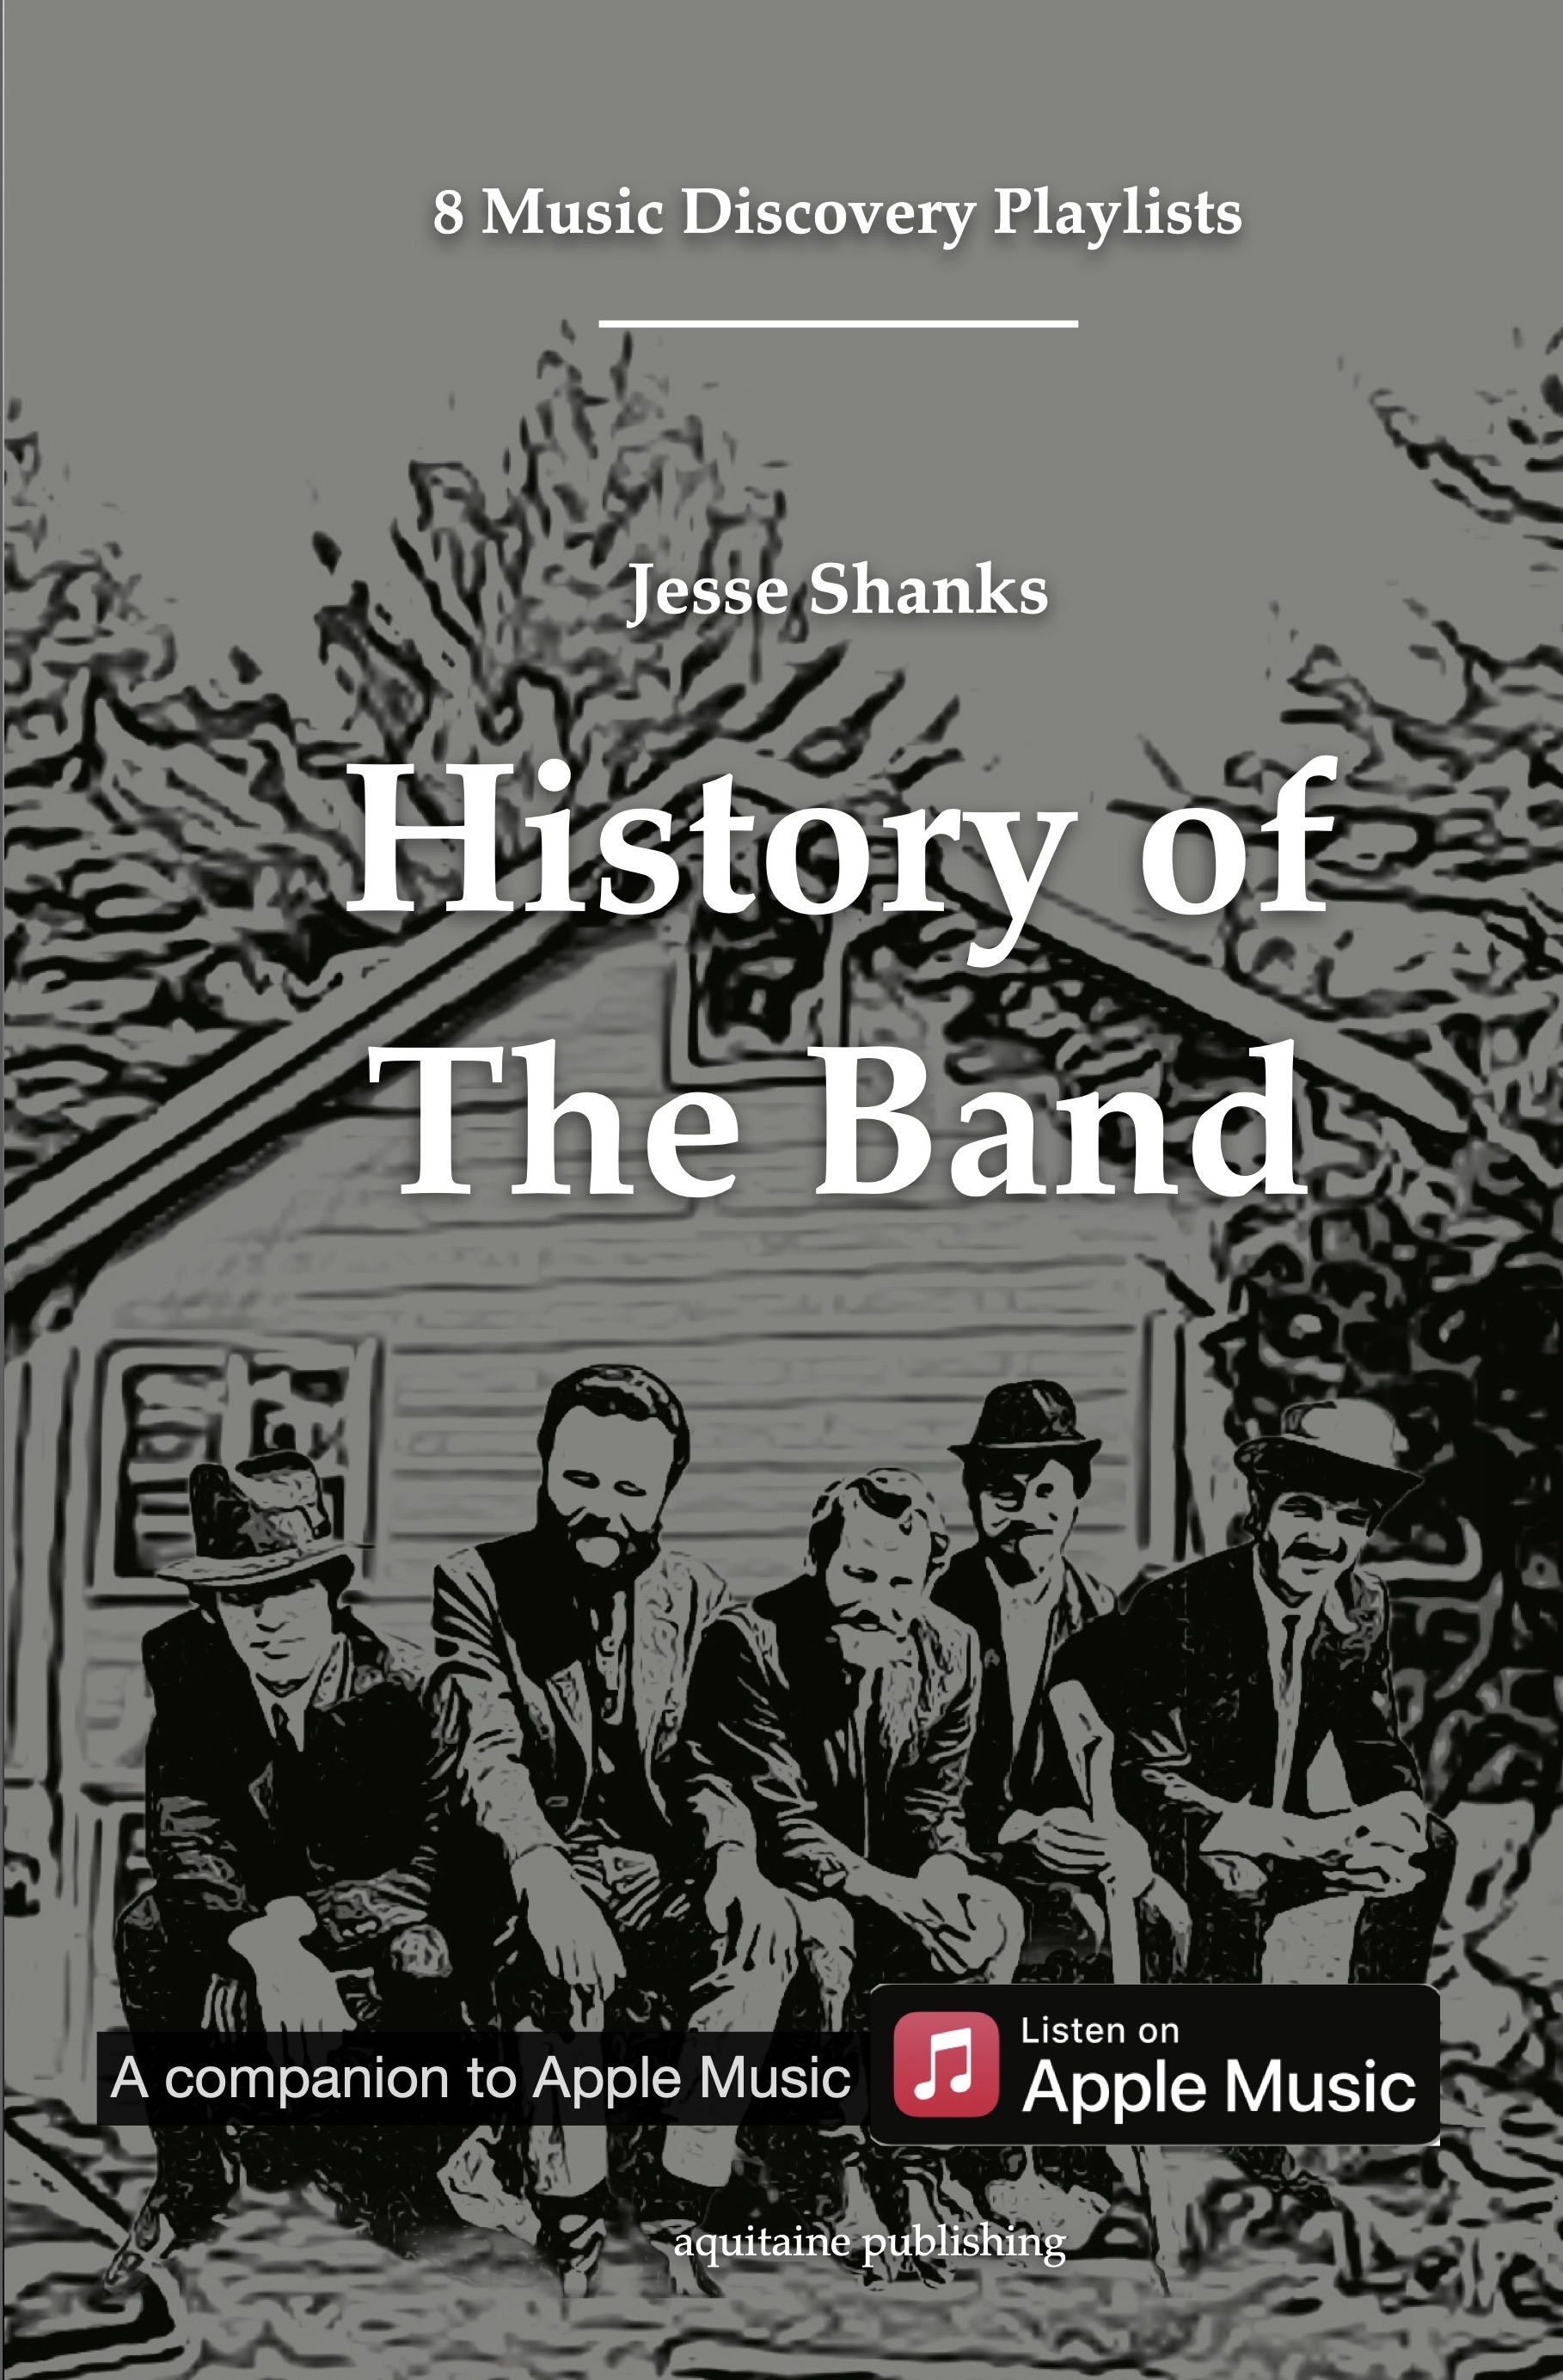 History of The Band: In 8 Music Discovery Playlists